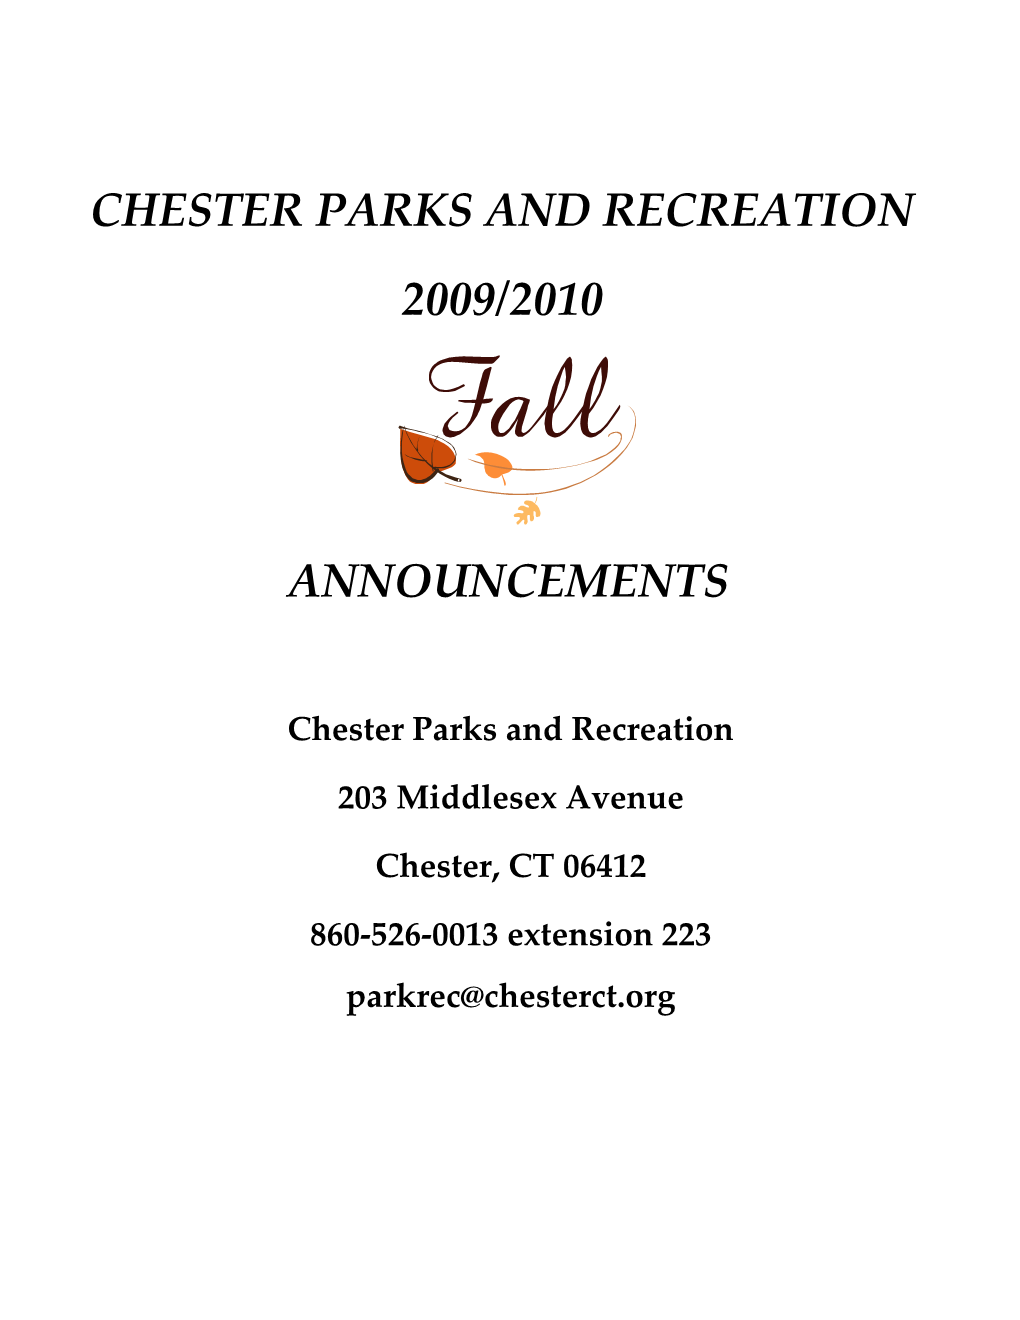 Chester Parks and Recreation